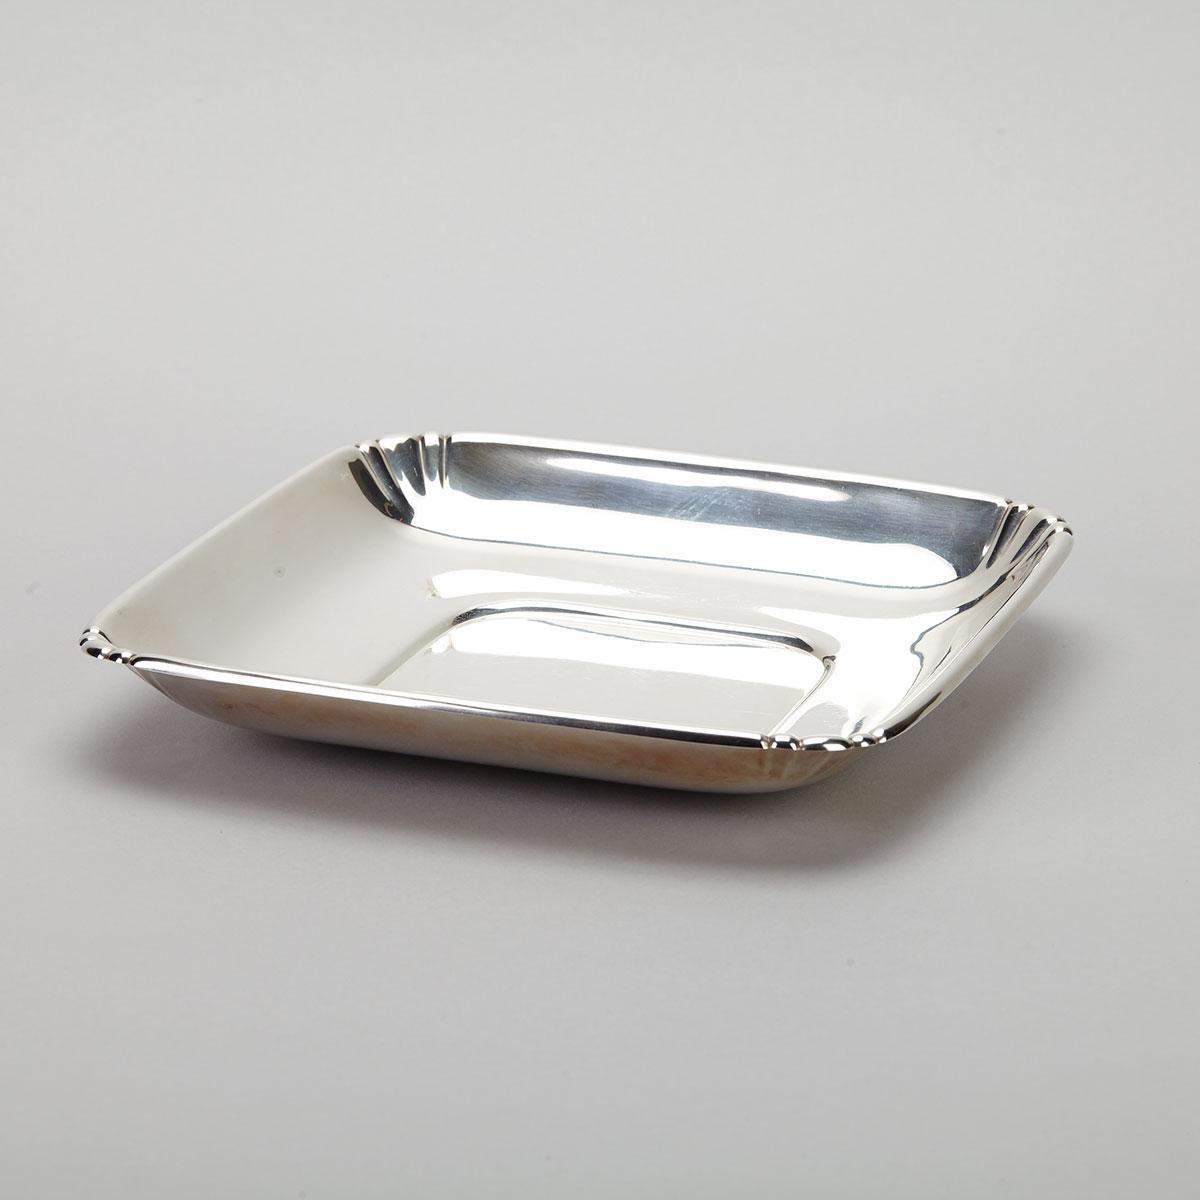 American Silver Square Serving Dish, Wallace Silversmiths, Wallingford, Ct., 20th century